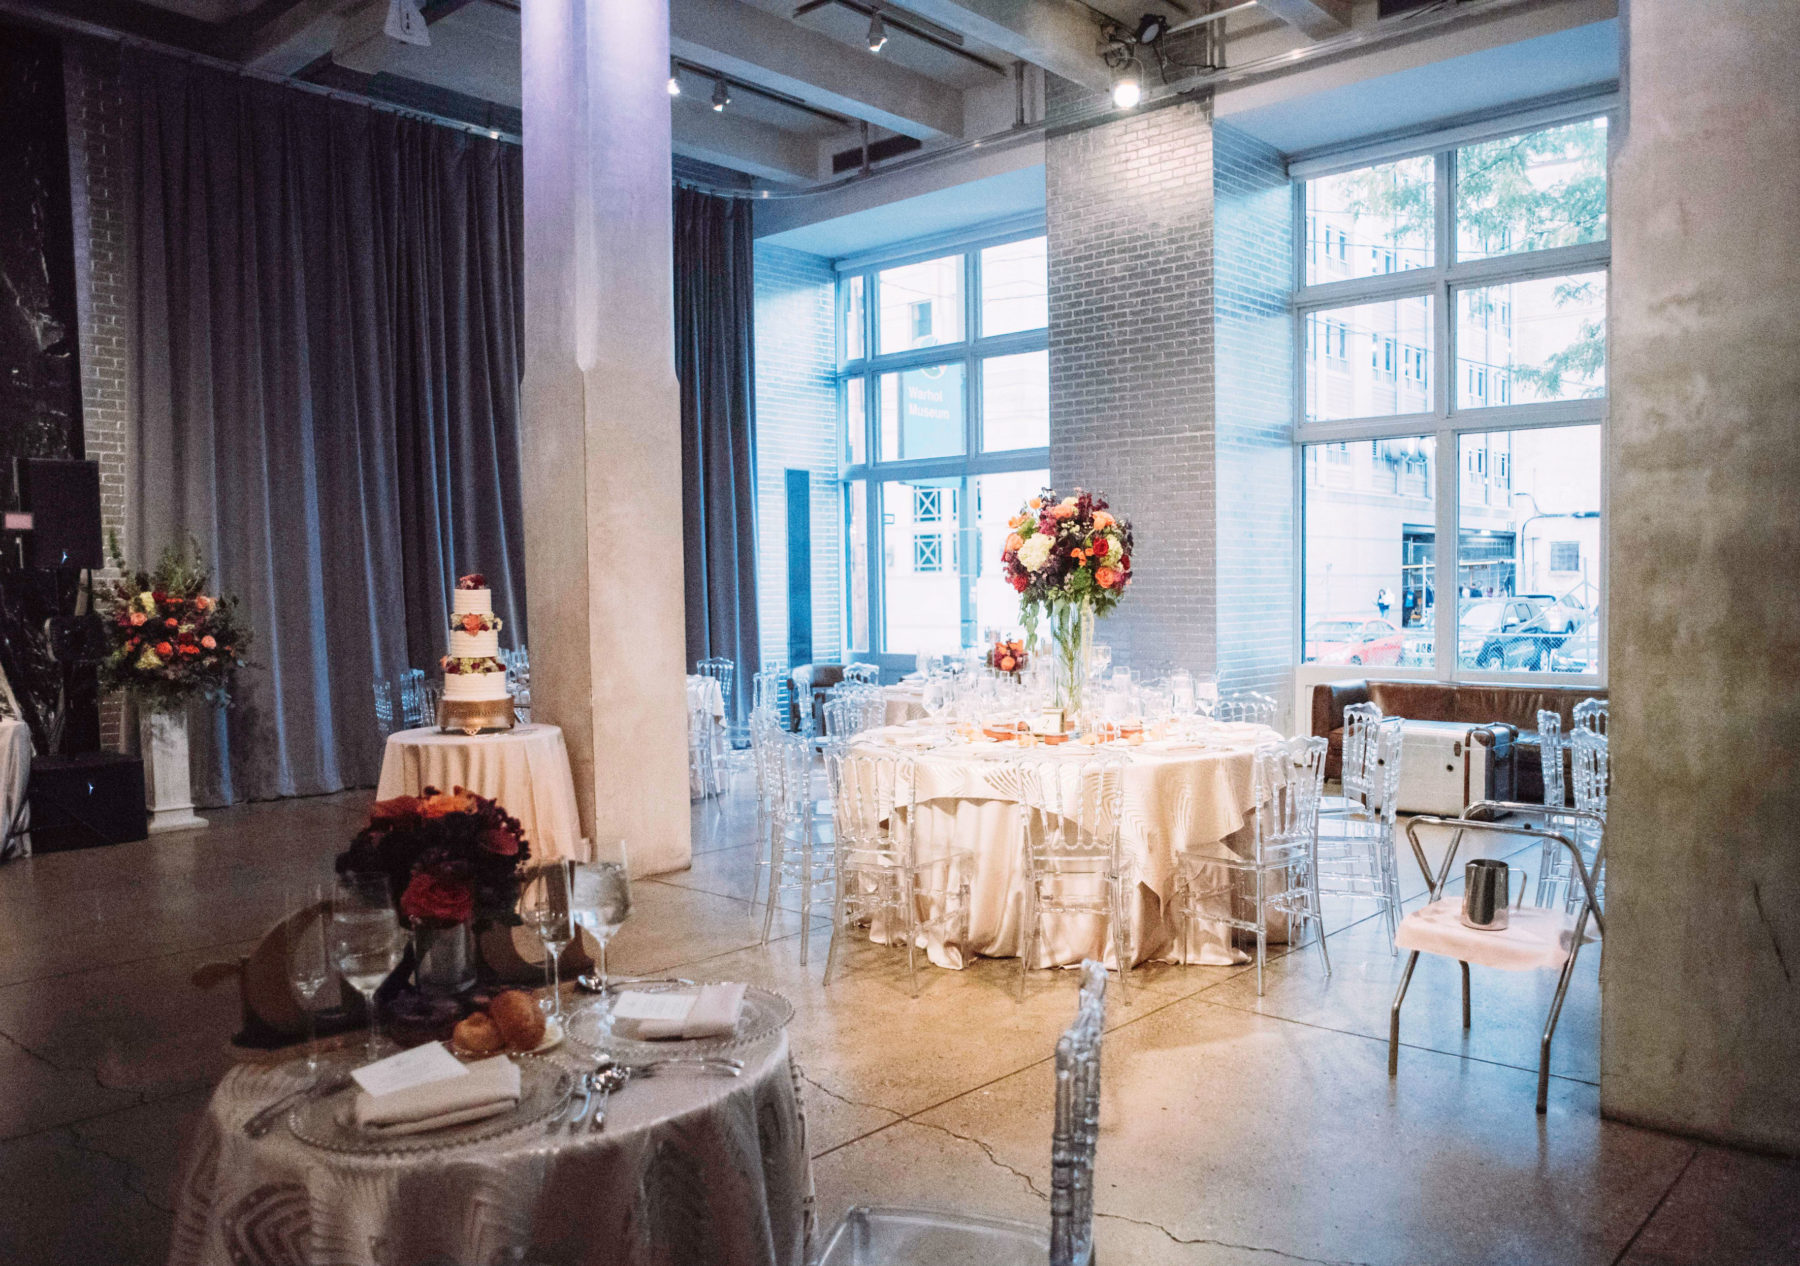 The Warhol entrance space with silver brick walls, gray curtains, two silver pillars, and large windows in the background. Tables with white tablecloths and clear, plastic chairs and flower centerpieces fill the lobby. A tiered wedding cake is on a table in the back left of the photo with a sweetheart table near the front of the photo.